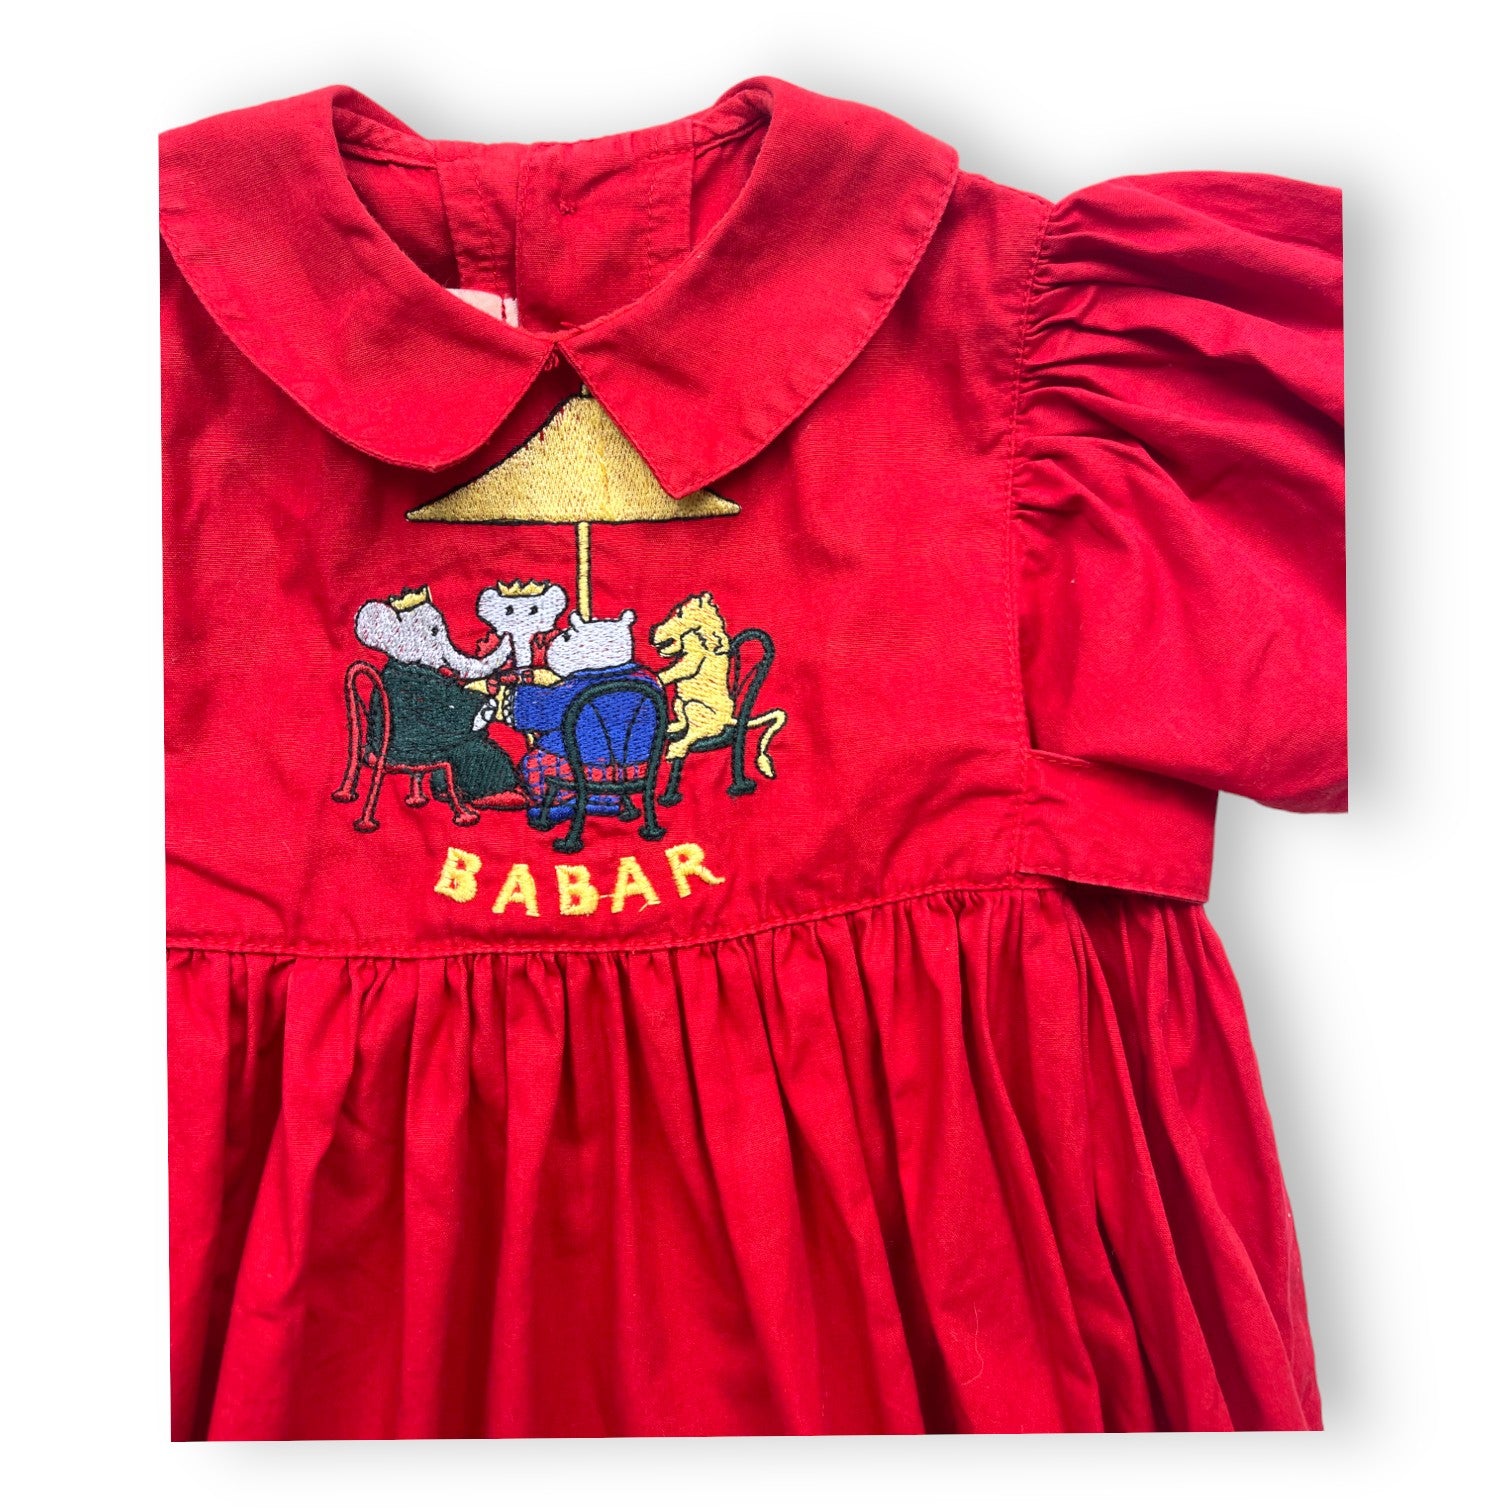 VINTAGE - Barboteuse rouge Babar - 3 mois